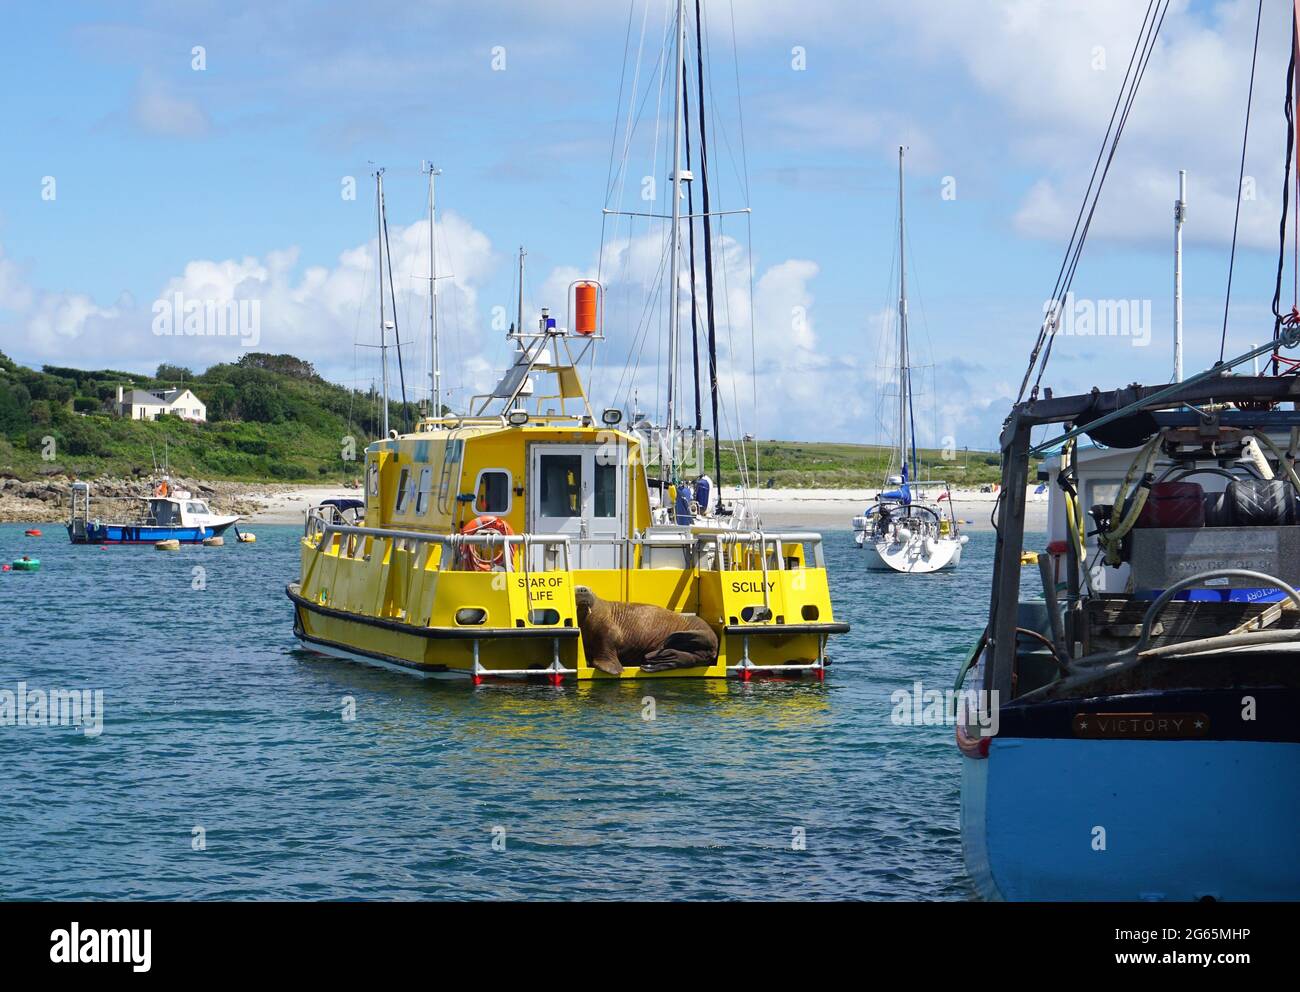 Wally the Walrus naps on the Star of Life at St Mary's harbour, Isles of Scilly, UK Stock Photo